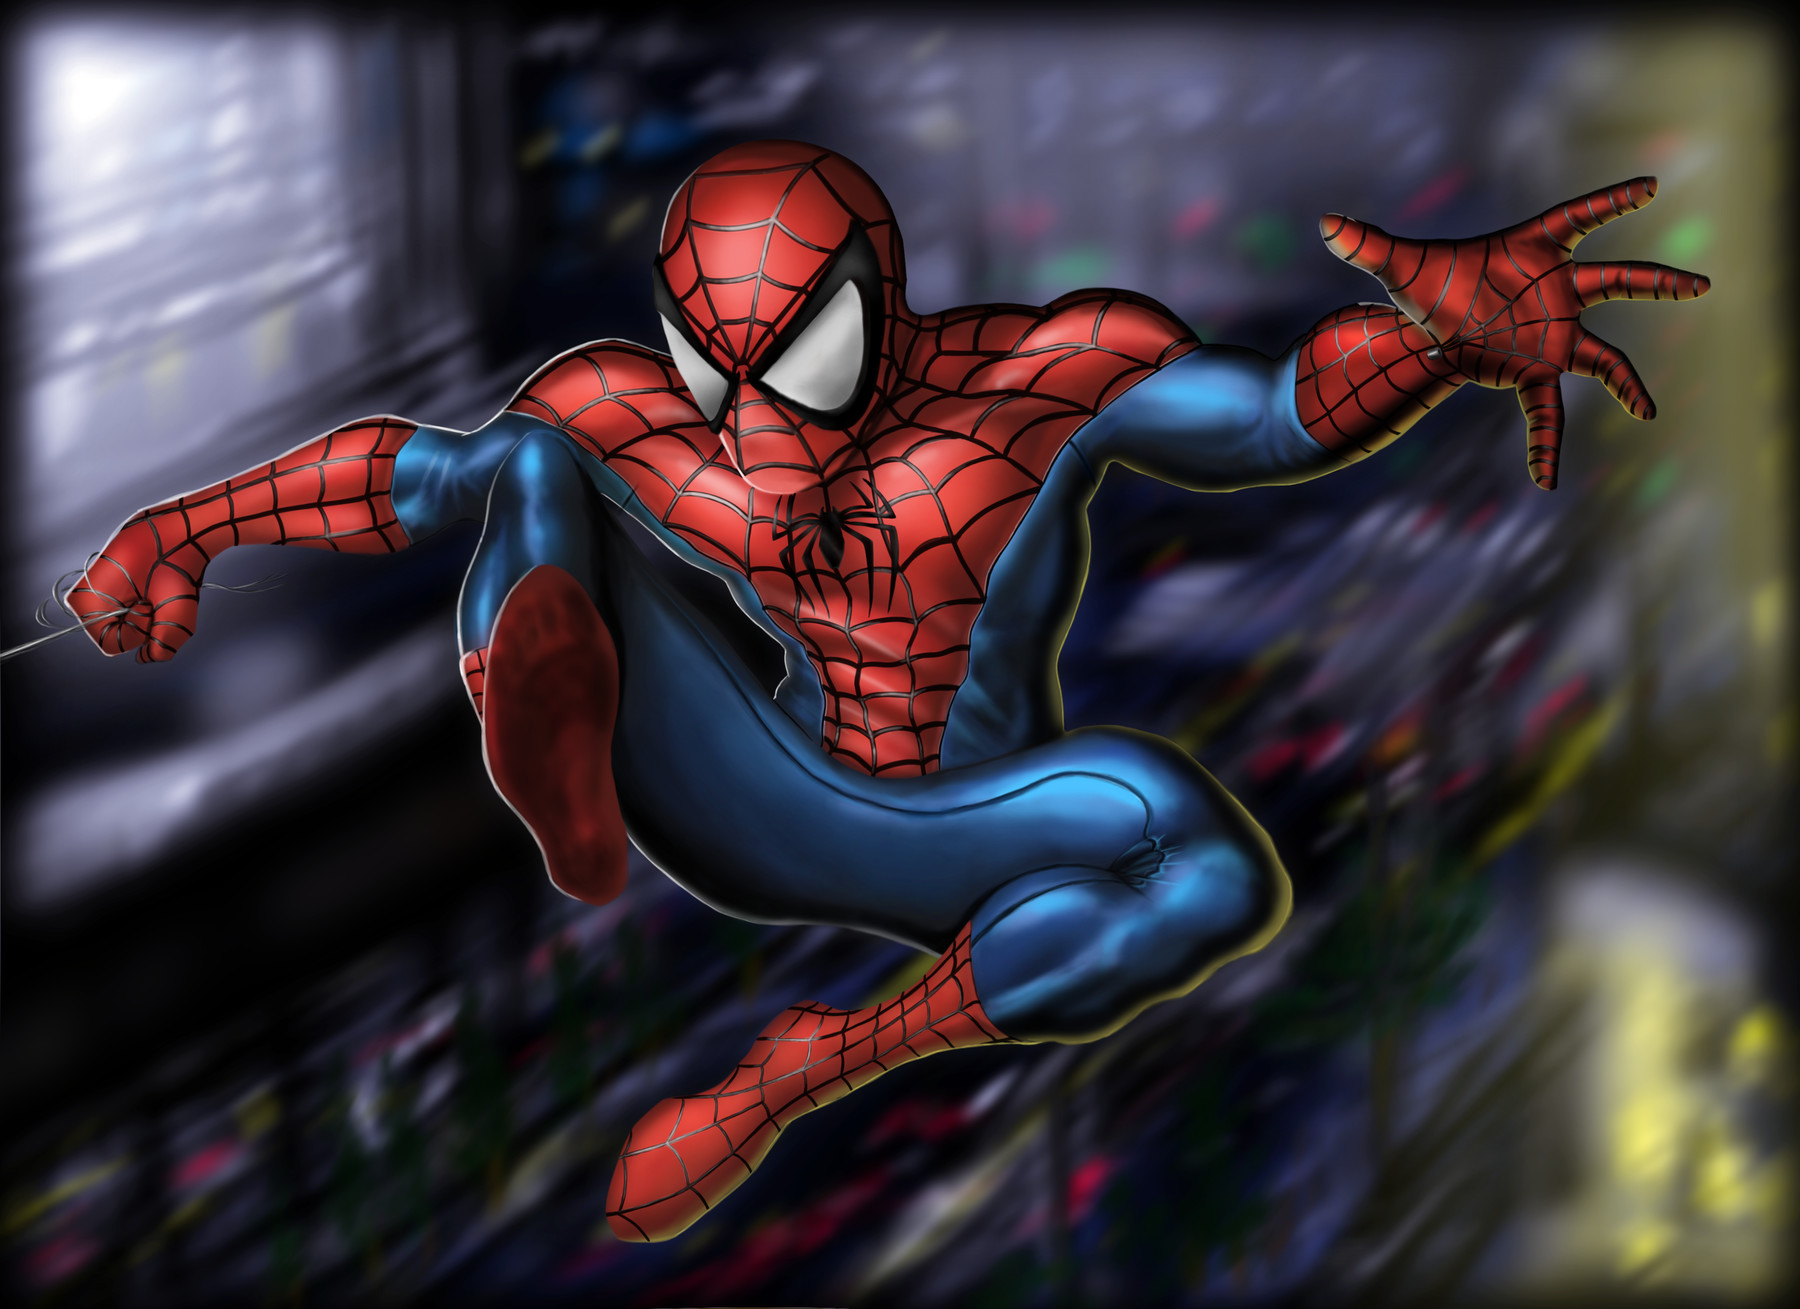 Spider-Man Poster with PSD file